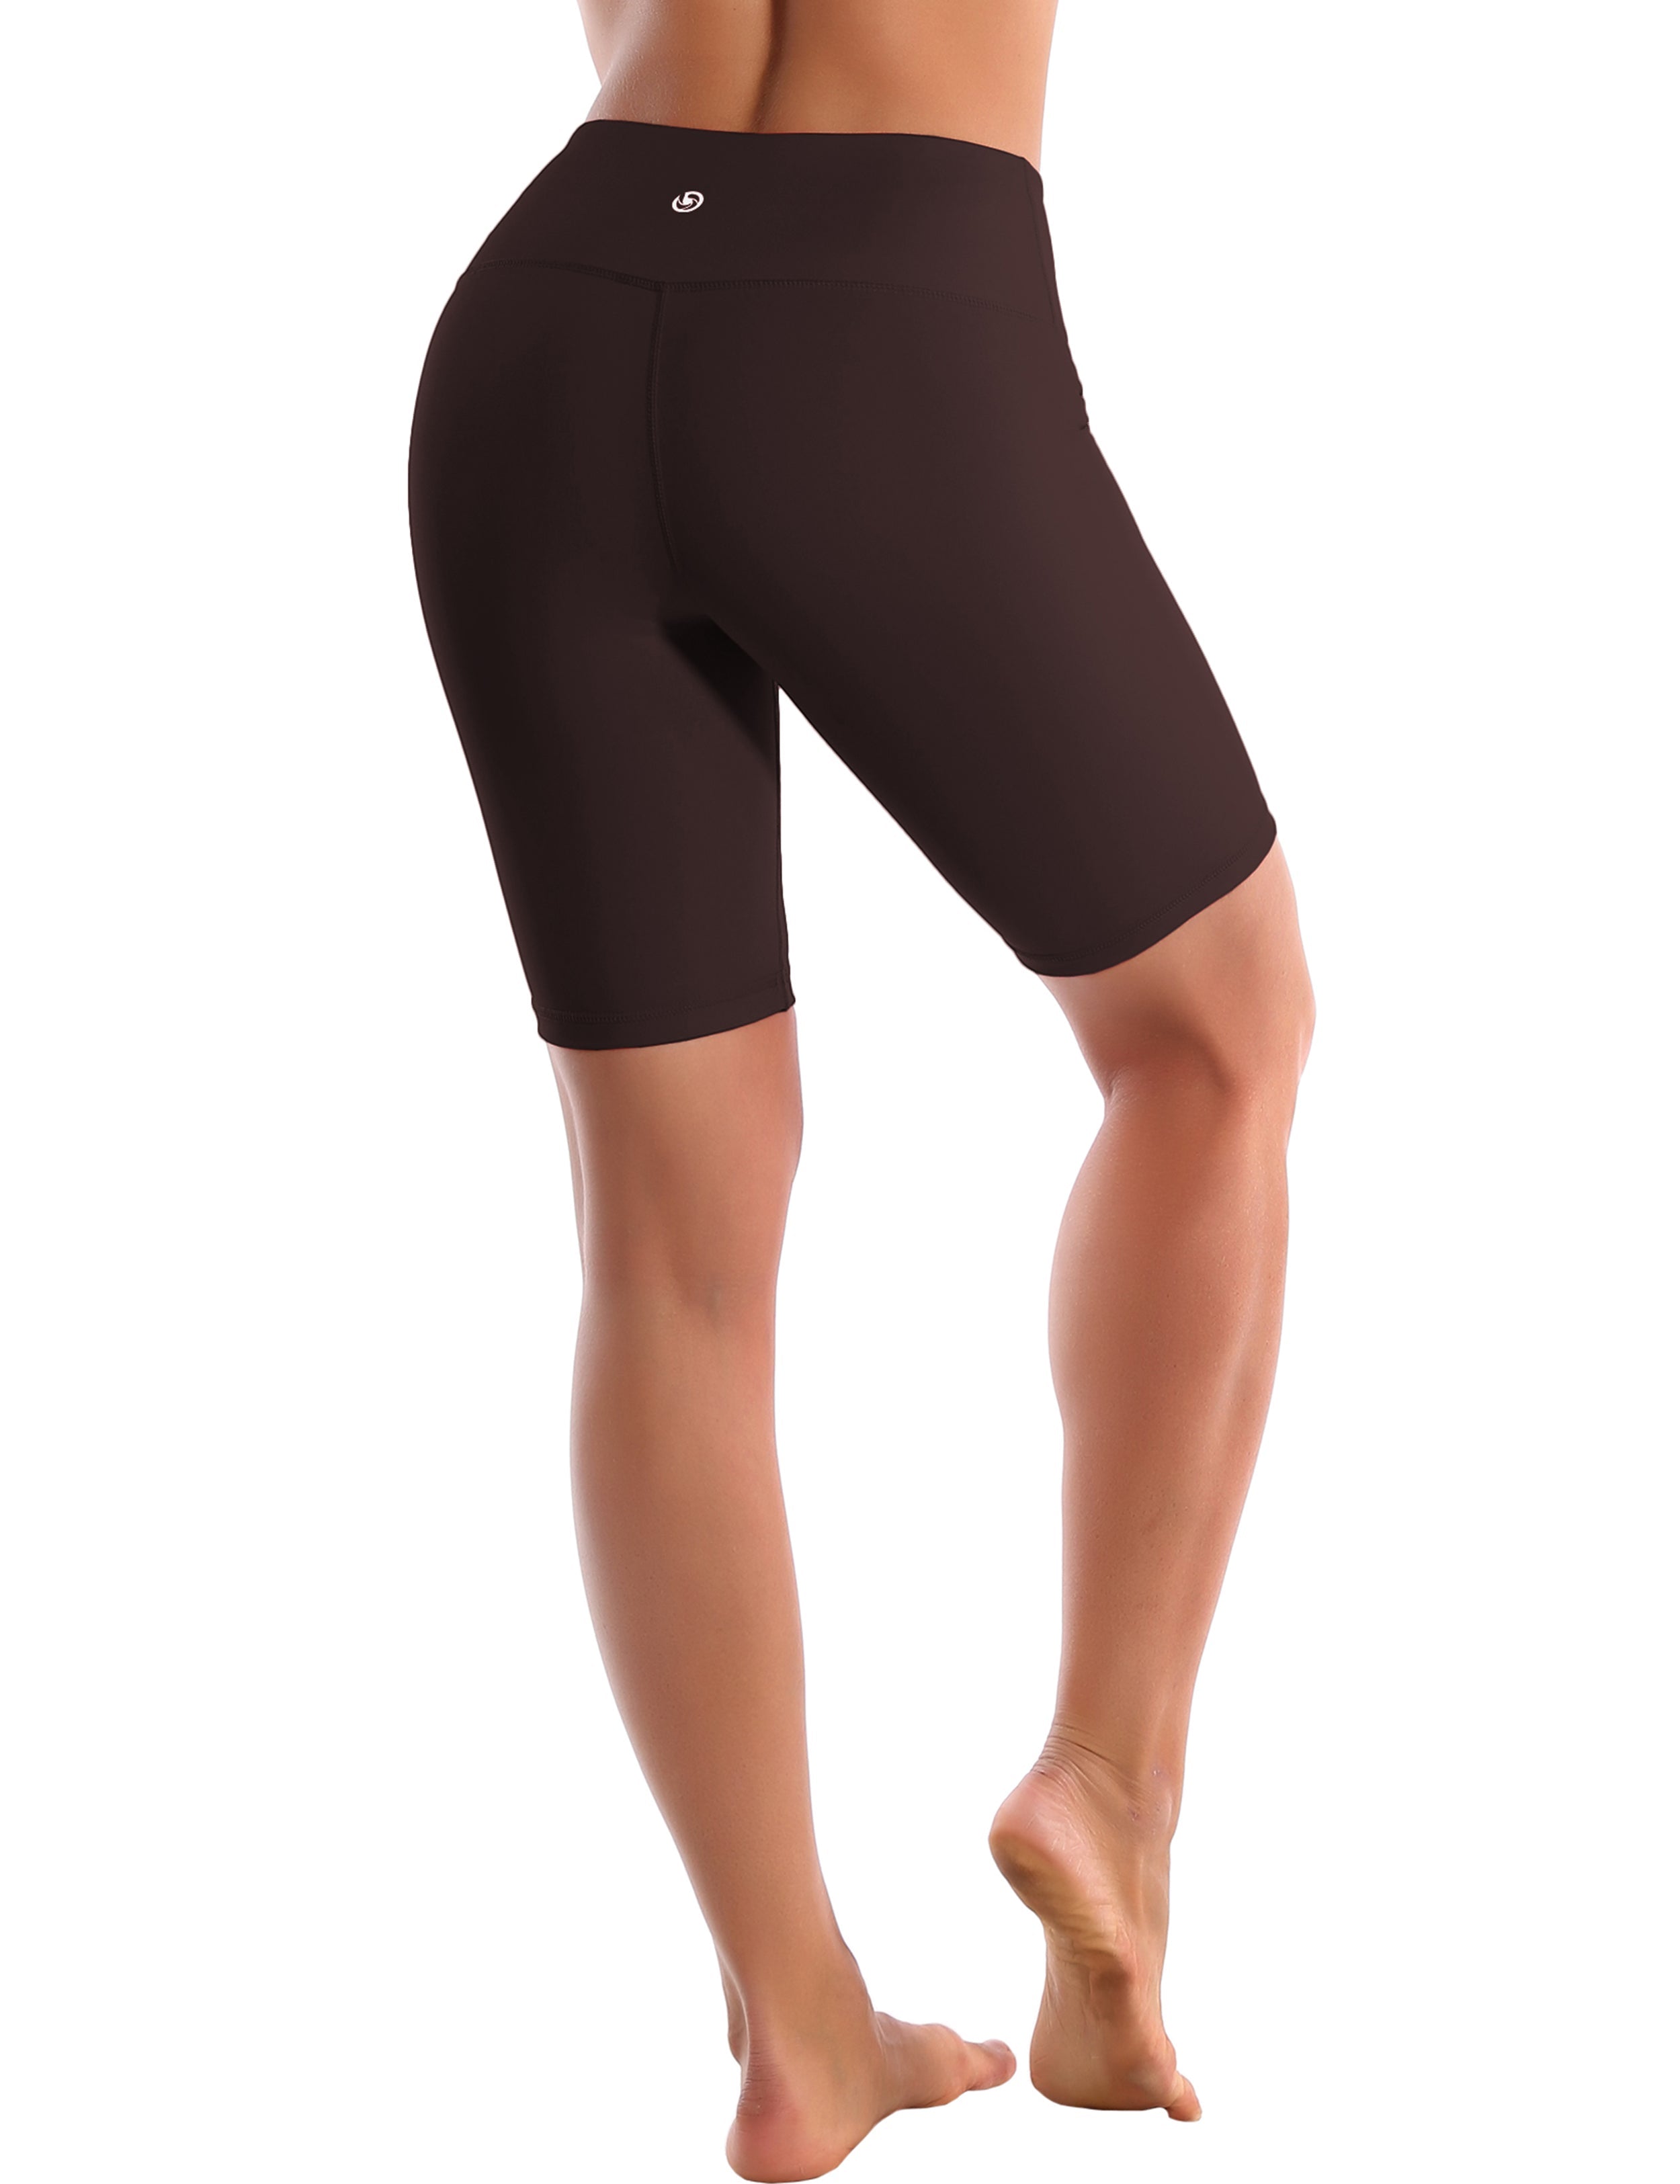 8" High Waist Plus Size Shorts mahoganymaroon Sleek, soft, smooth and totally comfortable: our newest style is here. Softest-ever fabric High elasticity High density 4-way stretch Fabric doesn't attract lint easily No see-through Moisture-wicking Machine wash 75% Nylon, 25% Spandex